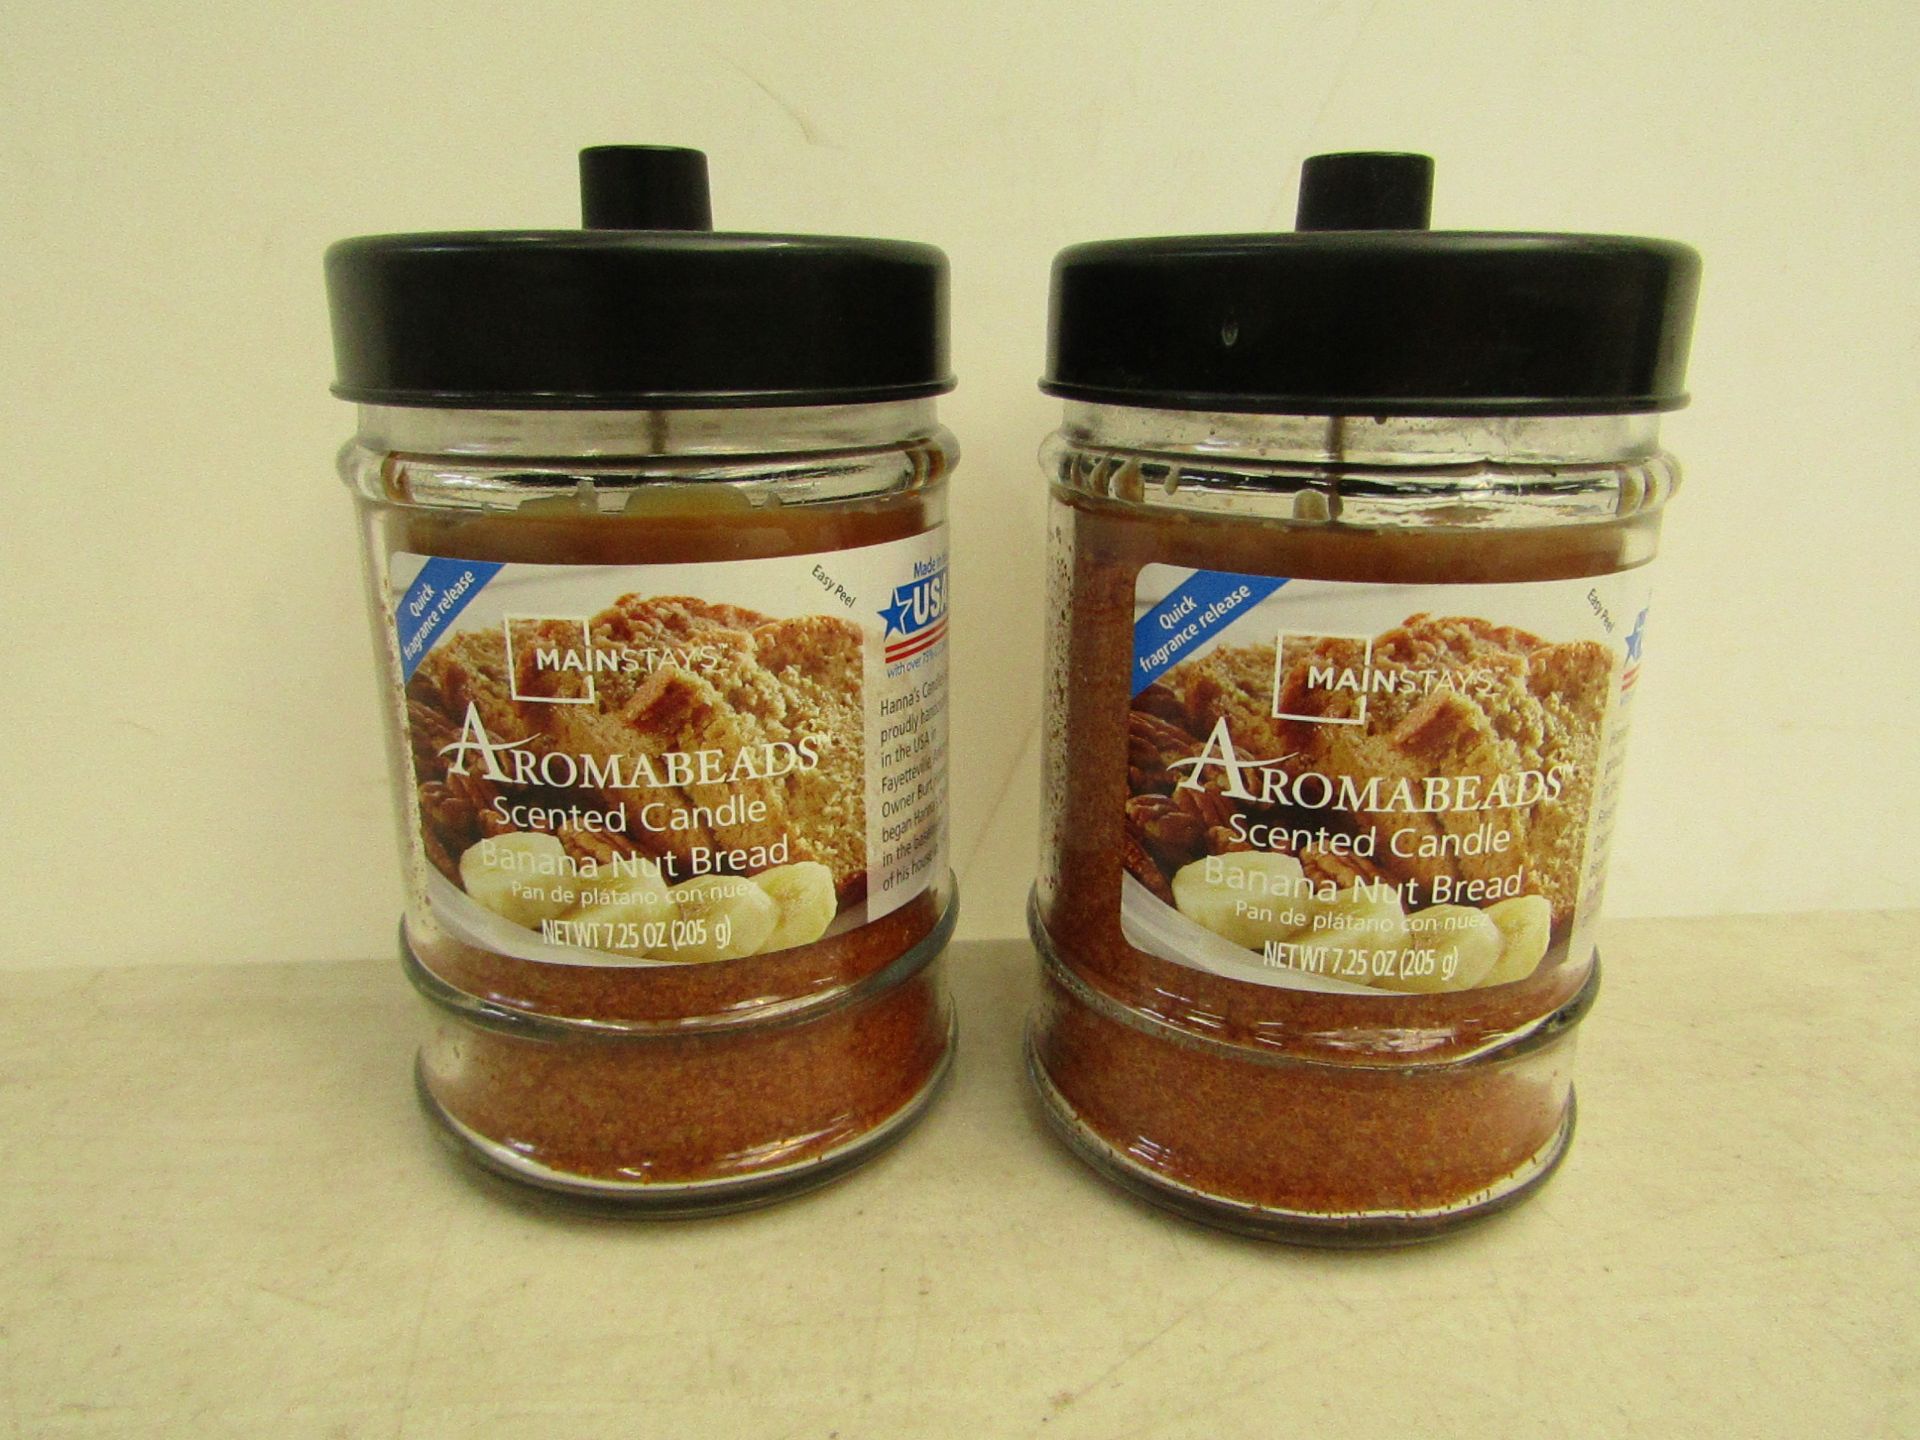 2x MainStays Aromabeads scented candles Banana Nut Bread, each jar contains 205g both new.